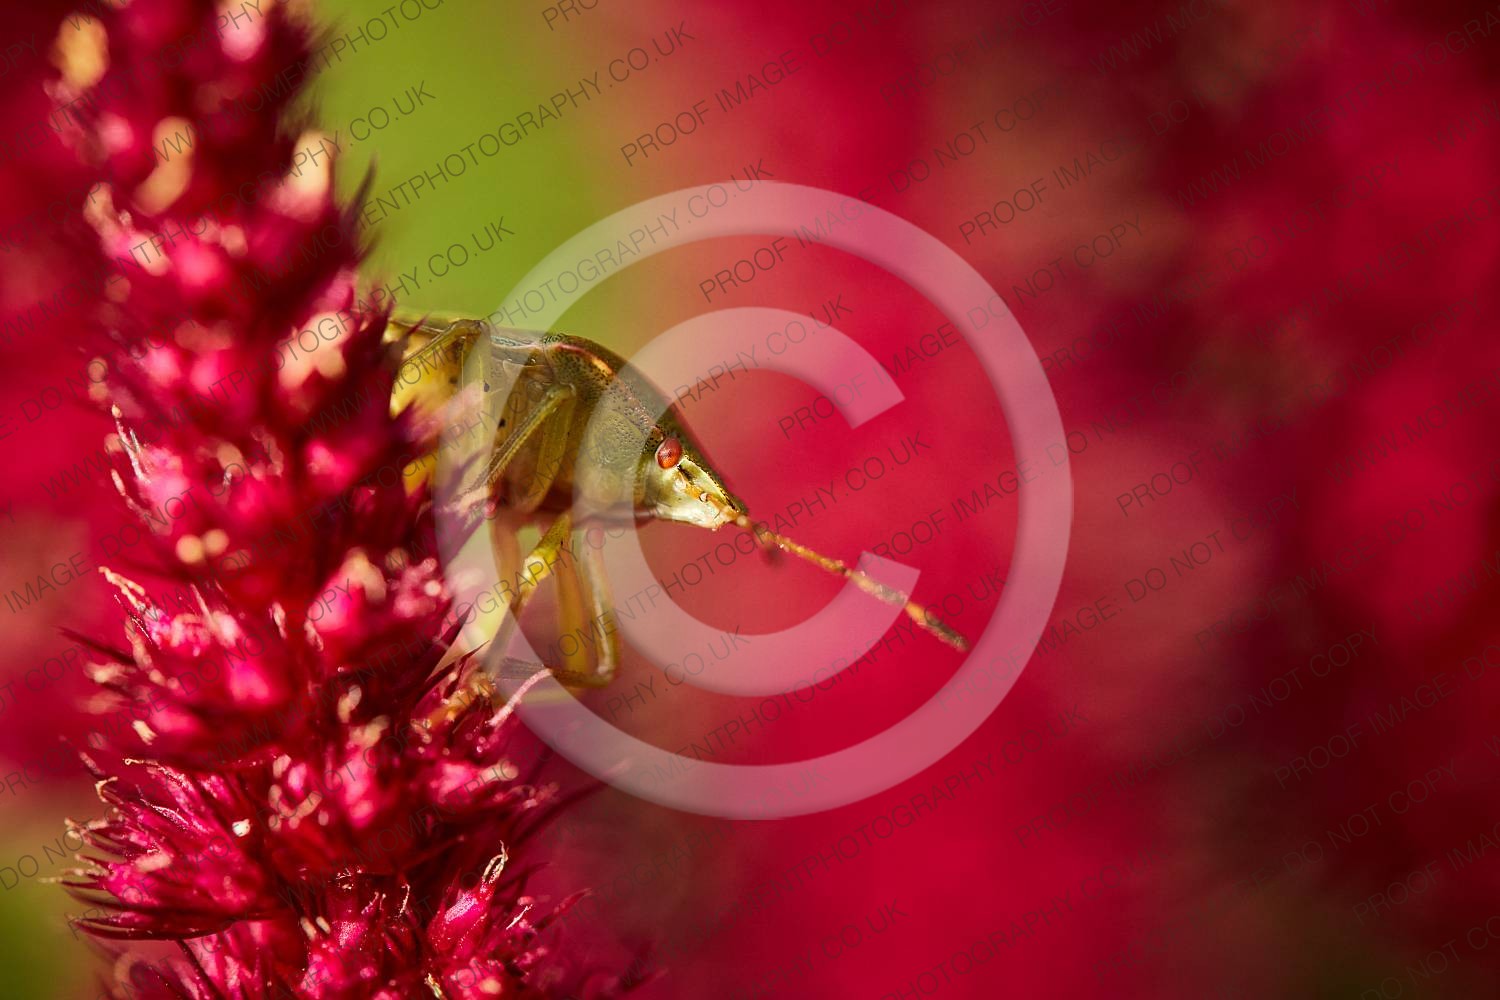 2020, autumn, bloom, bridgwater photographer, bug, chard, closeup, date, daytime, england, environment, fauna, flora, floral, flower, garden, green, green shield bug, insect, insects, macro, moment photography, natural, nature, outdoor, outside, pentatomidae, pest, places, red, september, shield, shield bug, somerset, somerset photographer, somerset photography, south west, south west england, stink, stink bug, summer, sunday, sunny, united kingdom, wildlife, wildlife conservation, zoology